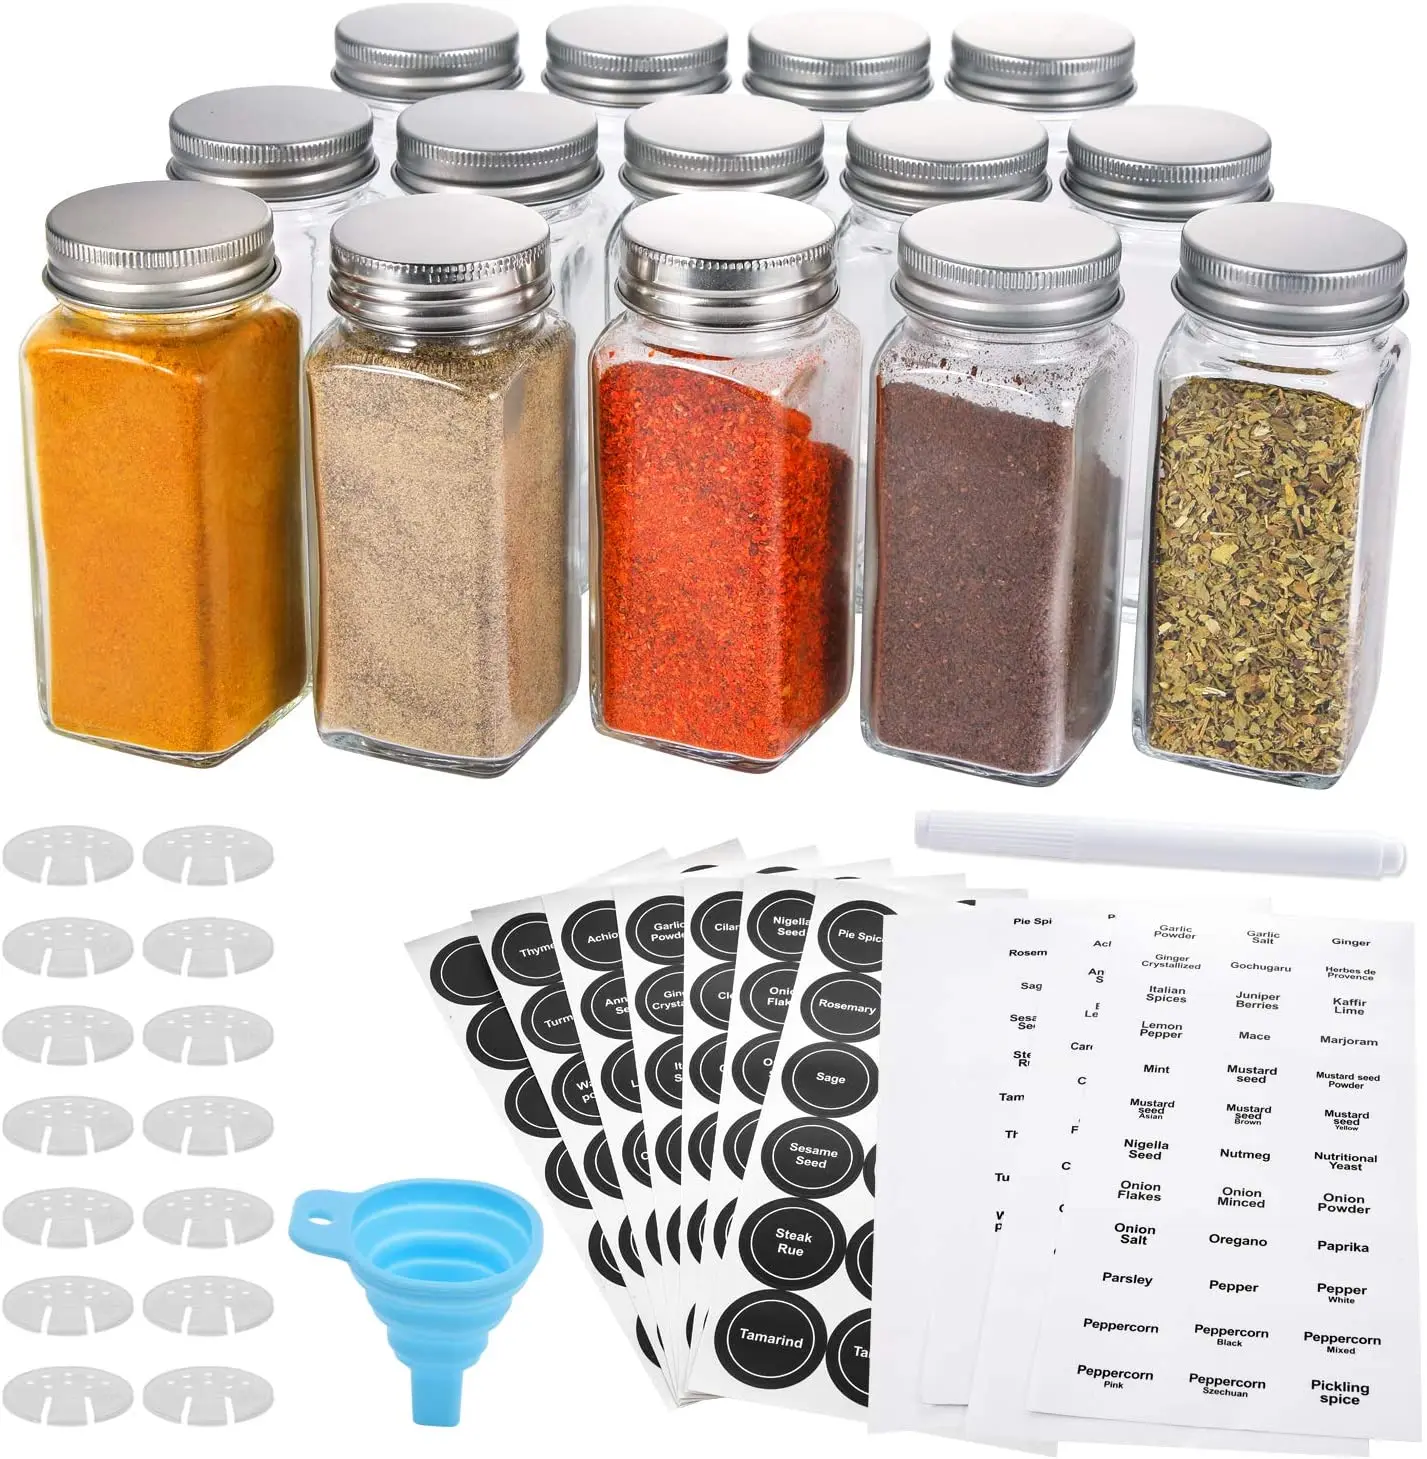 35 Pcs Glass Spice Jars with 400 Spice Labels 4oz Square Spice Bottles with Shaker Lids and Airtight Metal Caps Chalk Marker and Funnel Included 